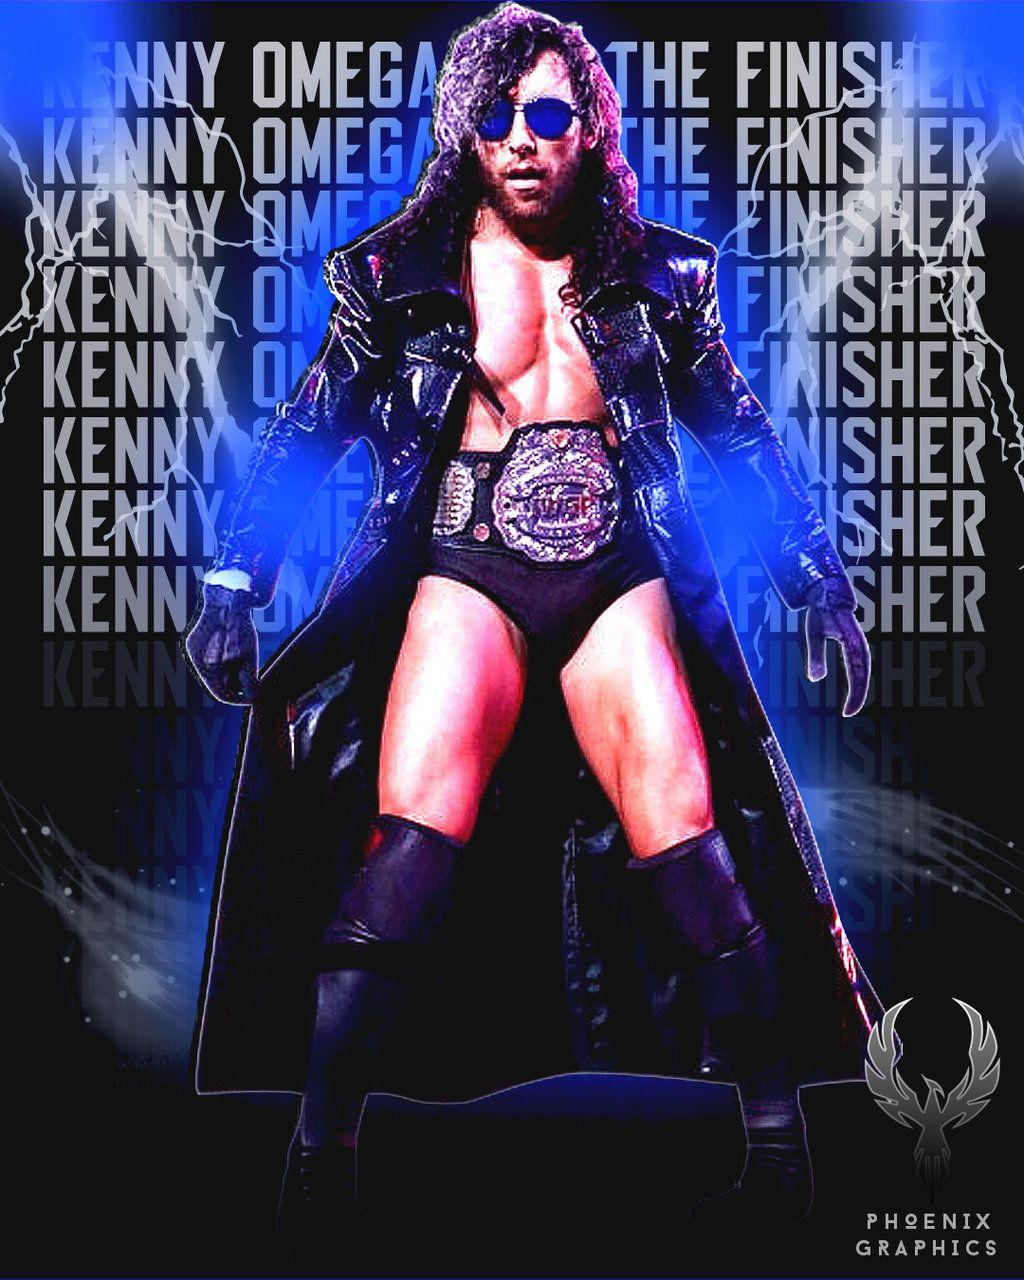 Kenny Omega. The Finisher. #WWEEdit